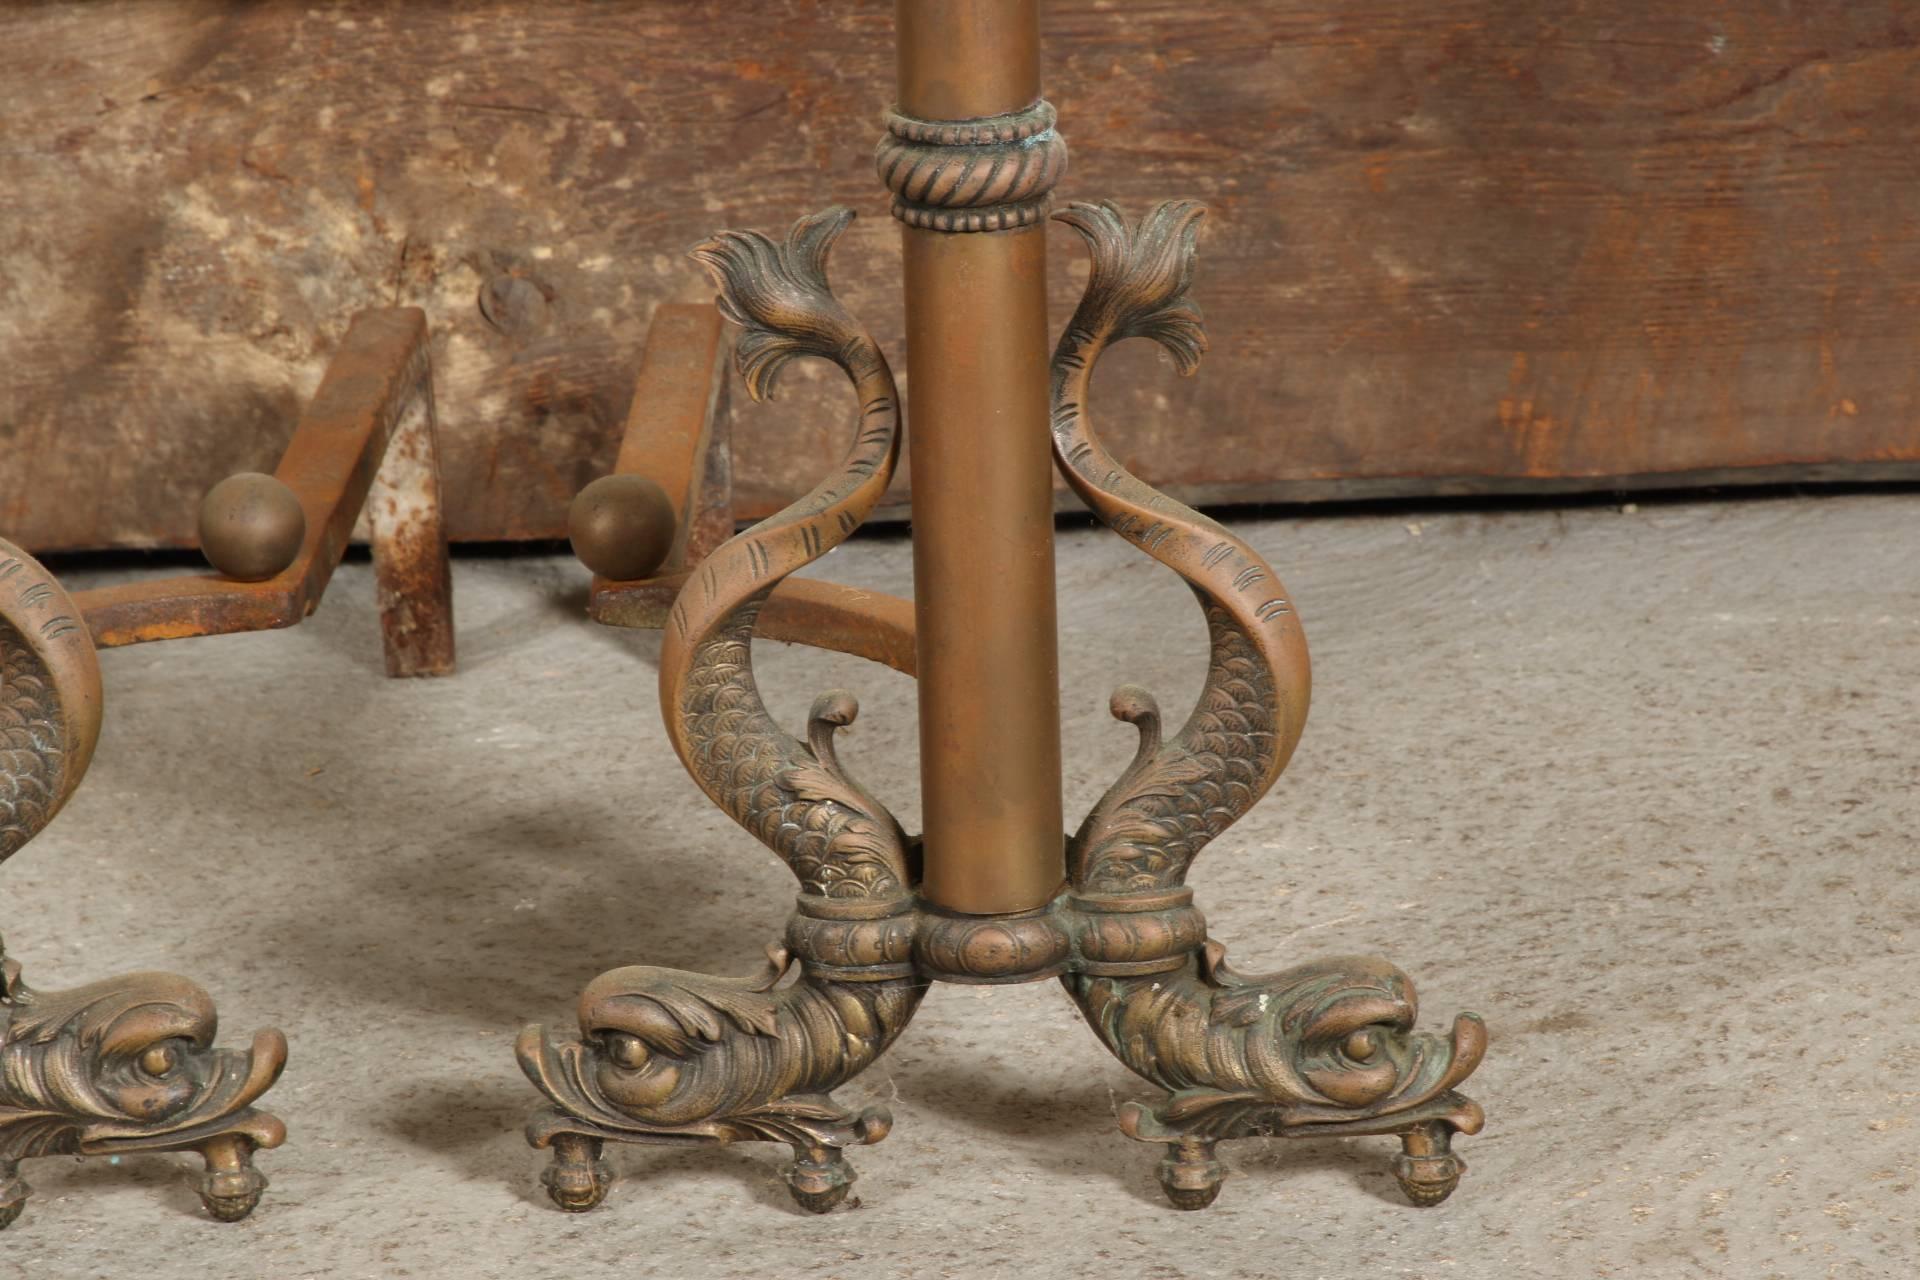 Tall reddish brass rods with intertwined dolphins on top and curved dolphin feet on each side. With iron rods at back. In a nice patina.
Condition: Some tarnish, rust to the iron.